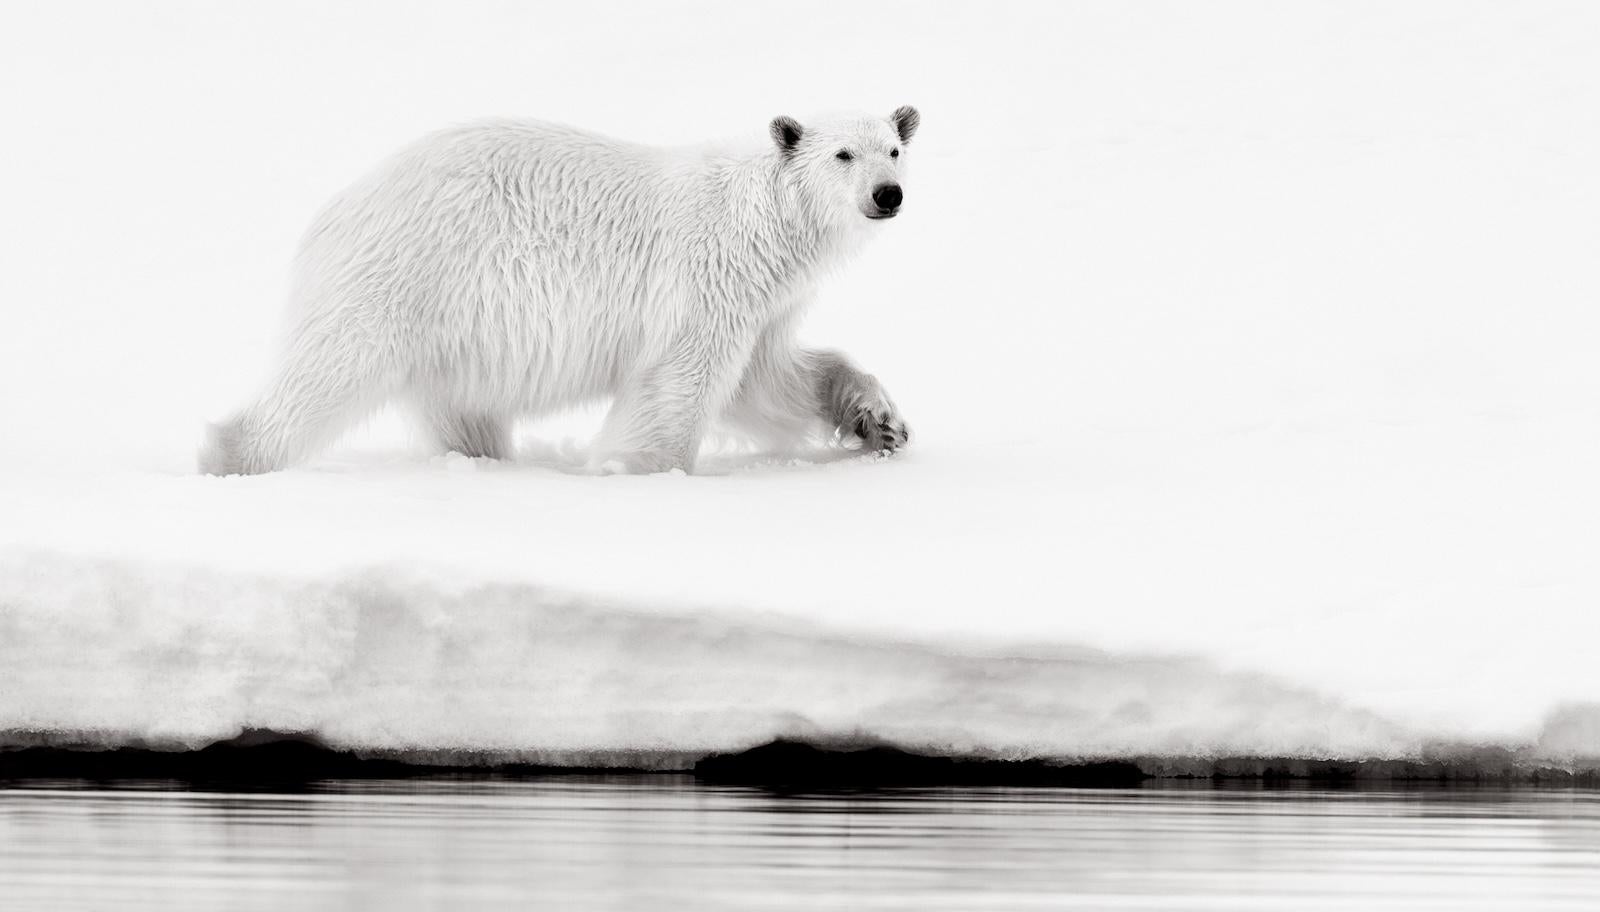 Drew Doggett Black and White Photograph - Lone polar bear walking at water's edge looking at something in the distance 